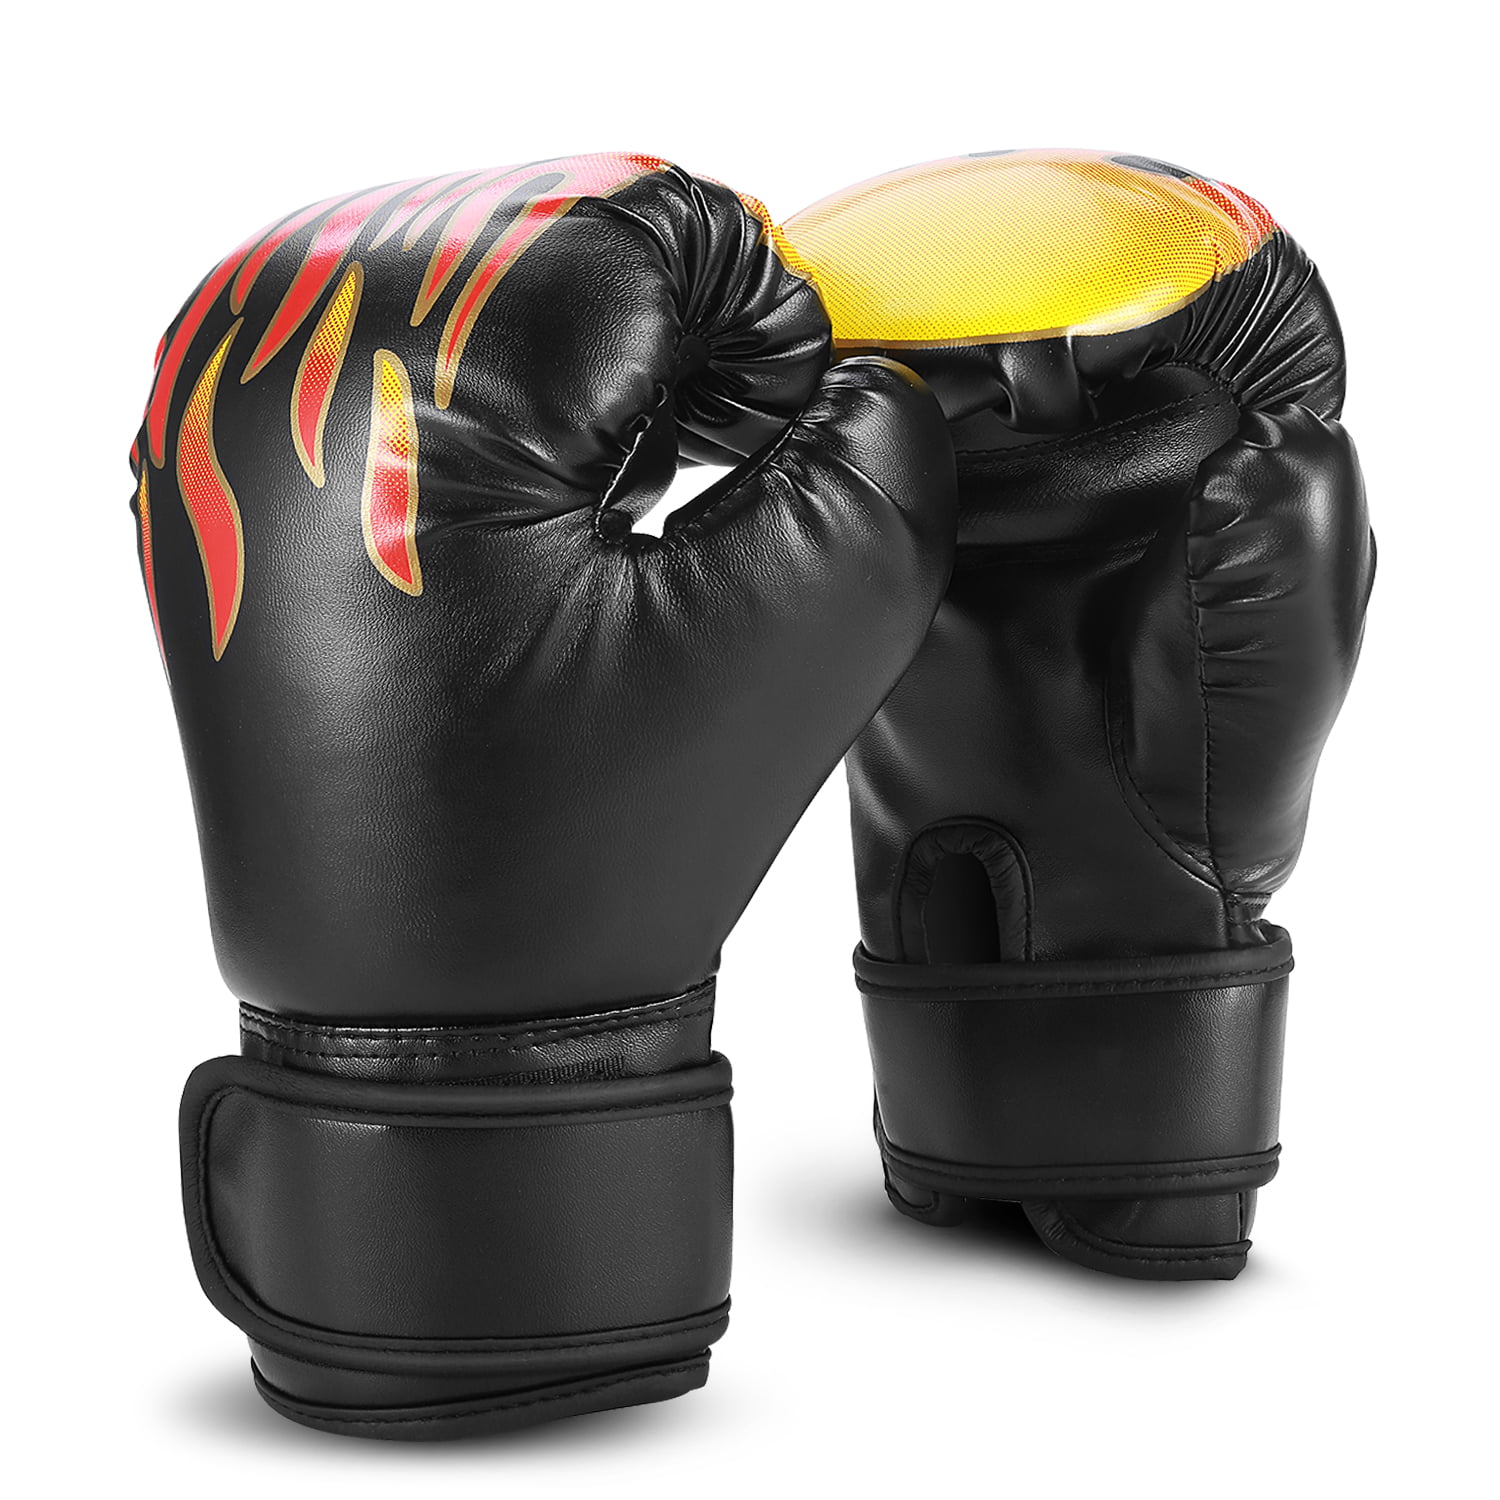 Childrens boxing gloves boy Muay Thai loose fight sandbags training punches